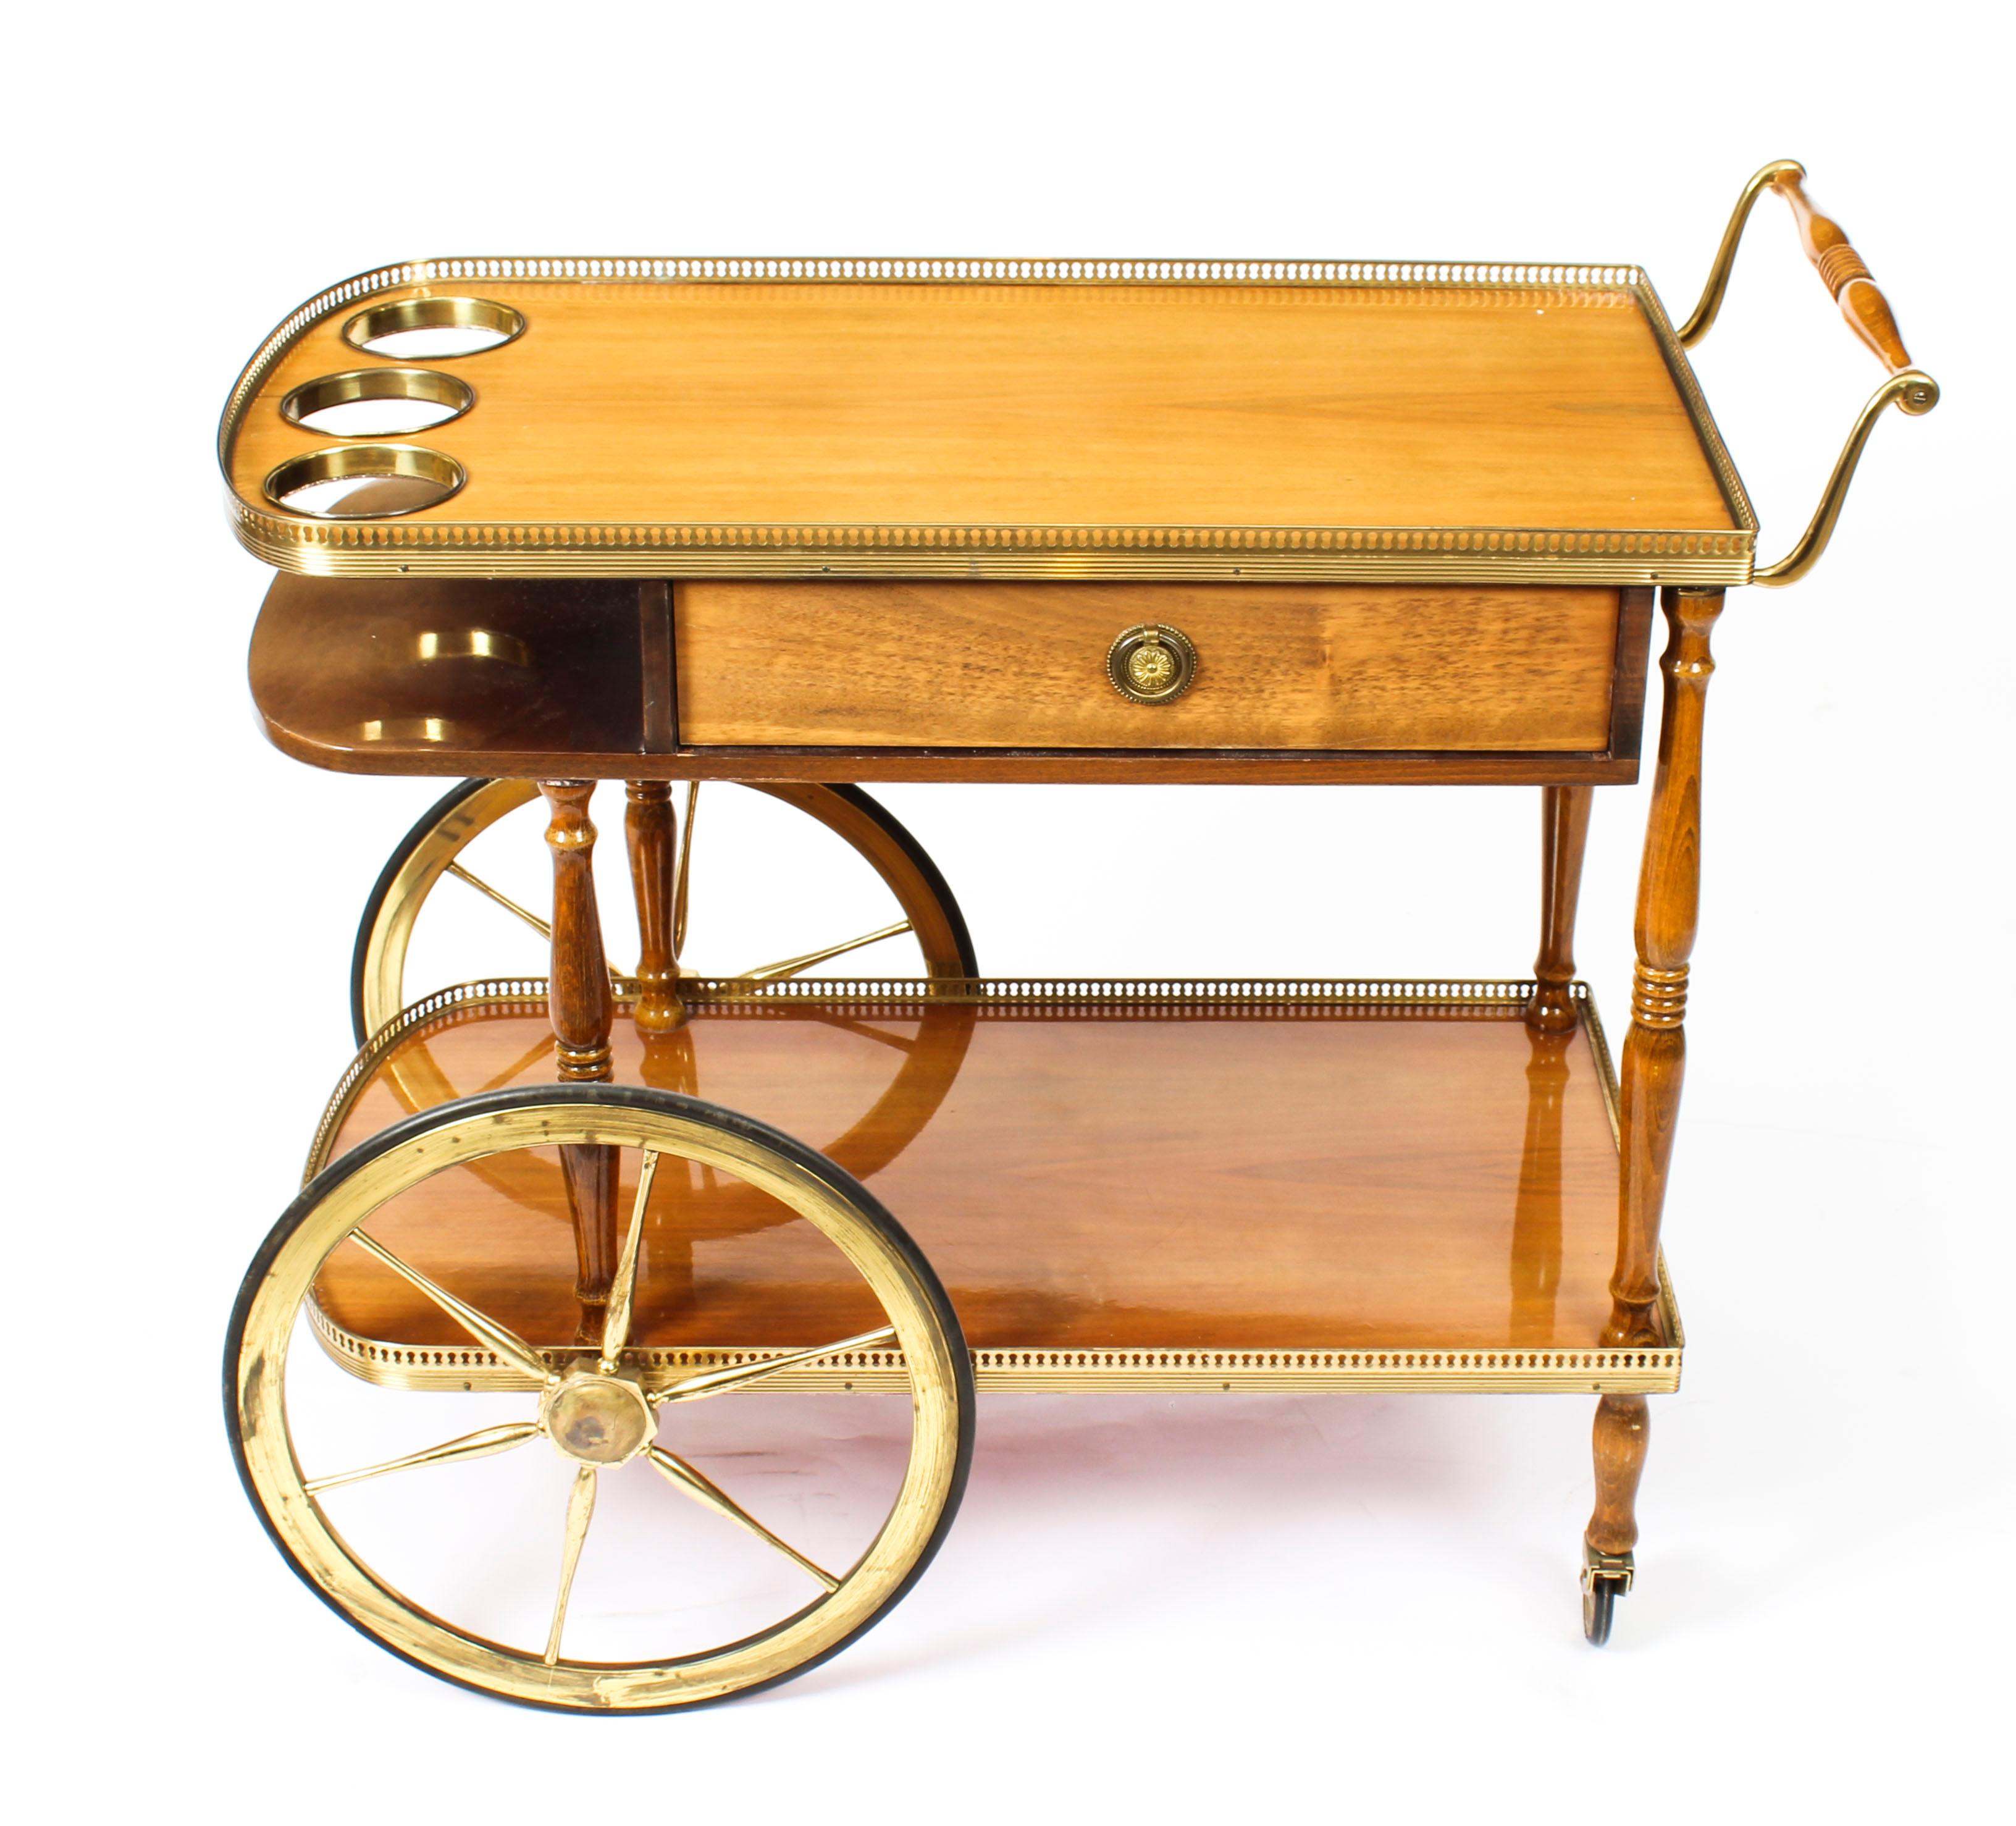 This is a very entertaining vintage birchwood midcentury drinks trolley circa 1960 in date.

The trolley features two levels with brass galleries joined by turned supports. The top gallery has a fitted three bottle holster and the frieze has a